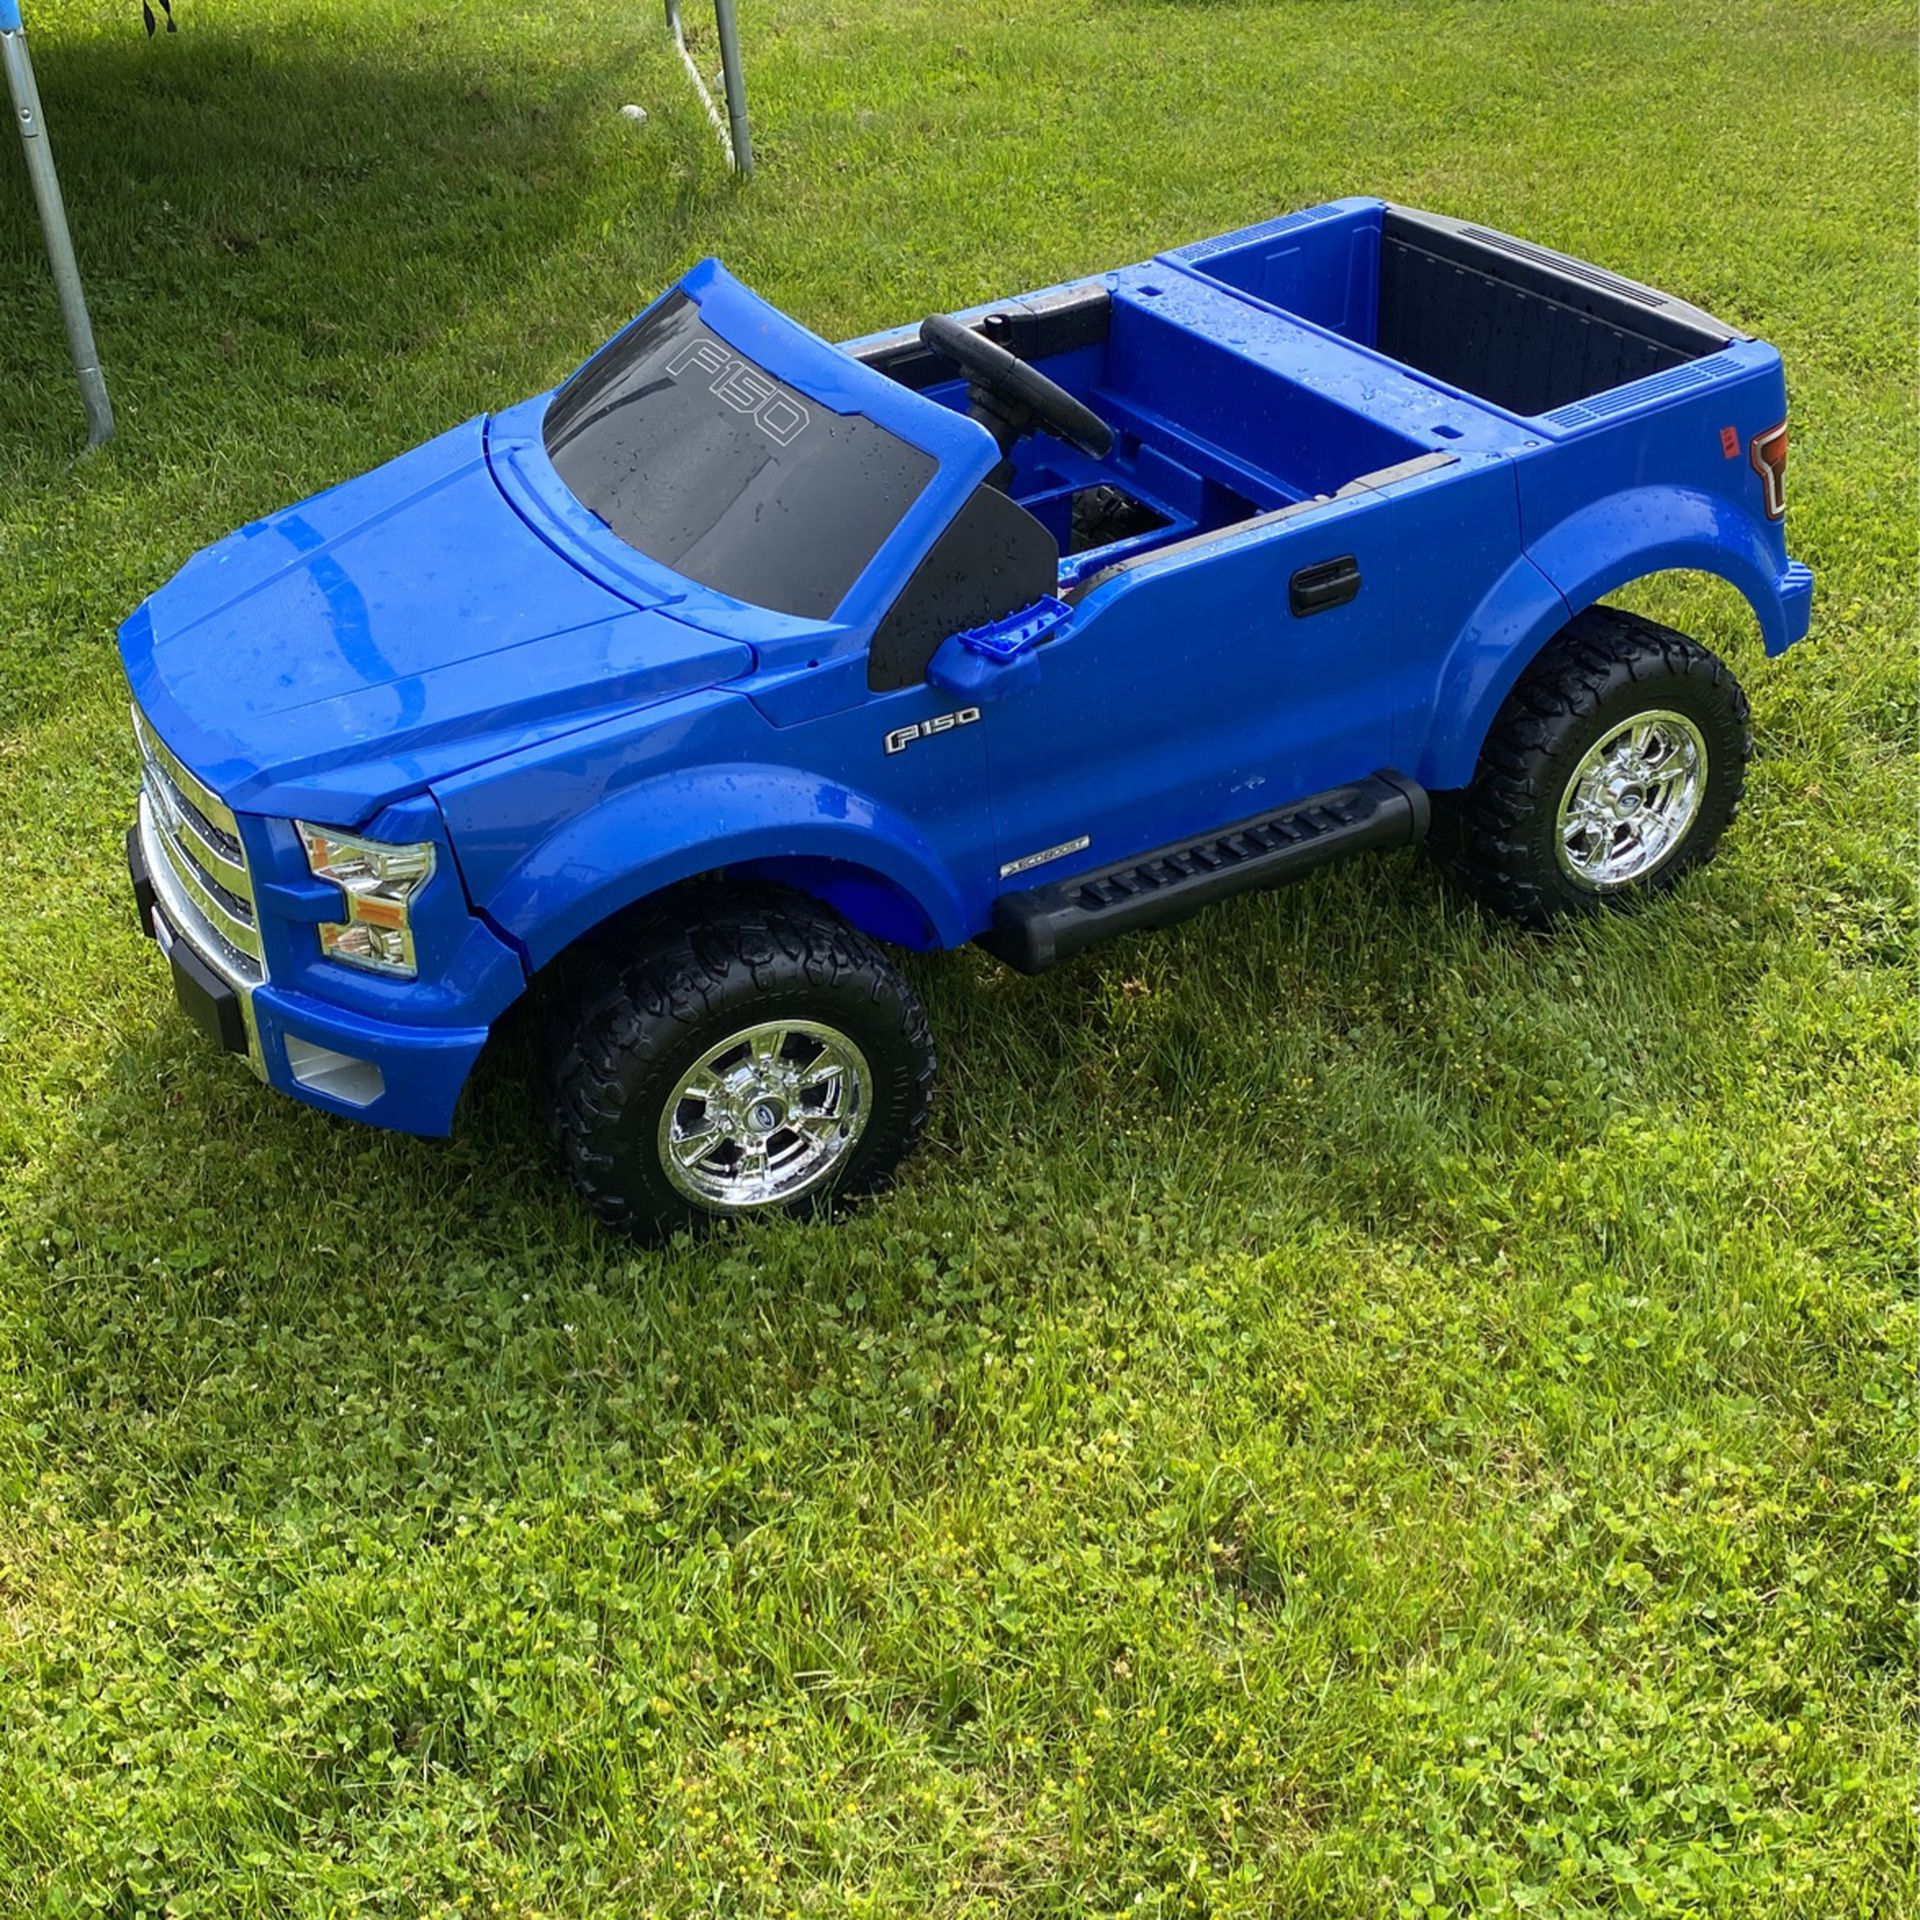 Photo F150 Ecoboost Toy Car